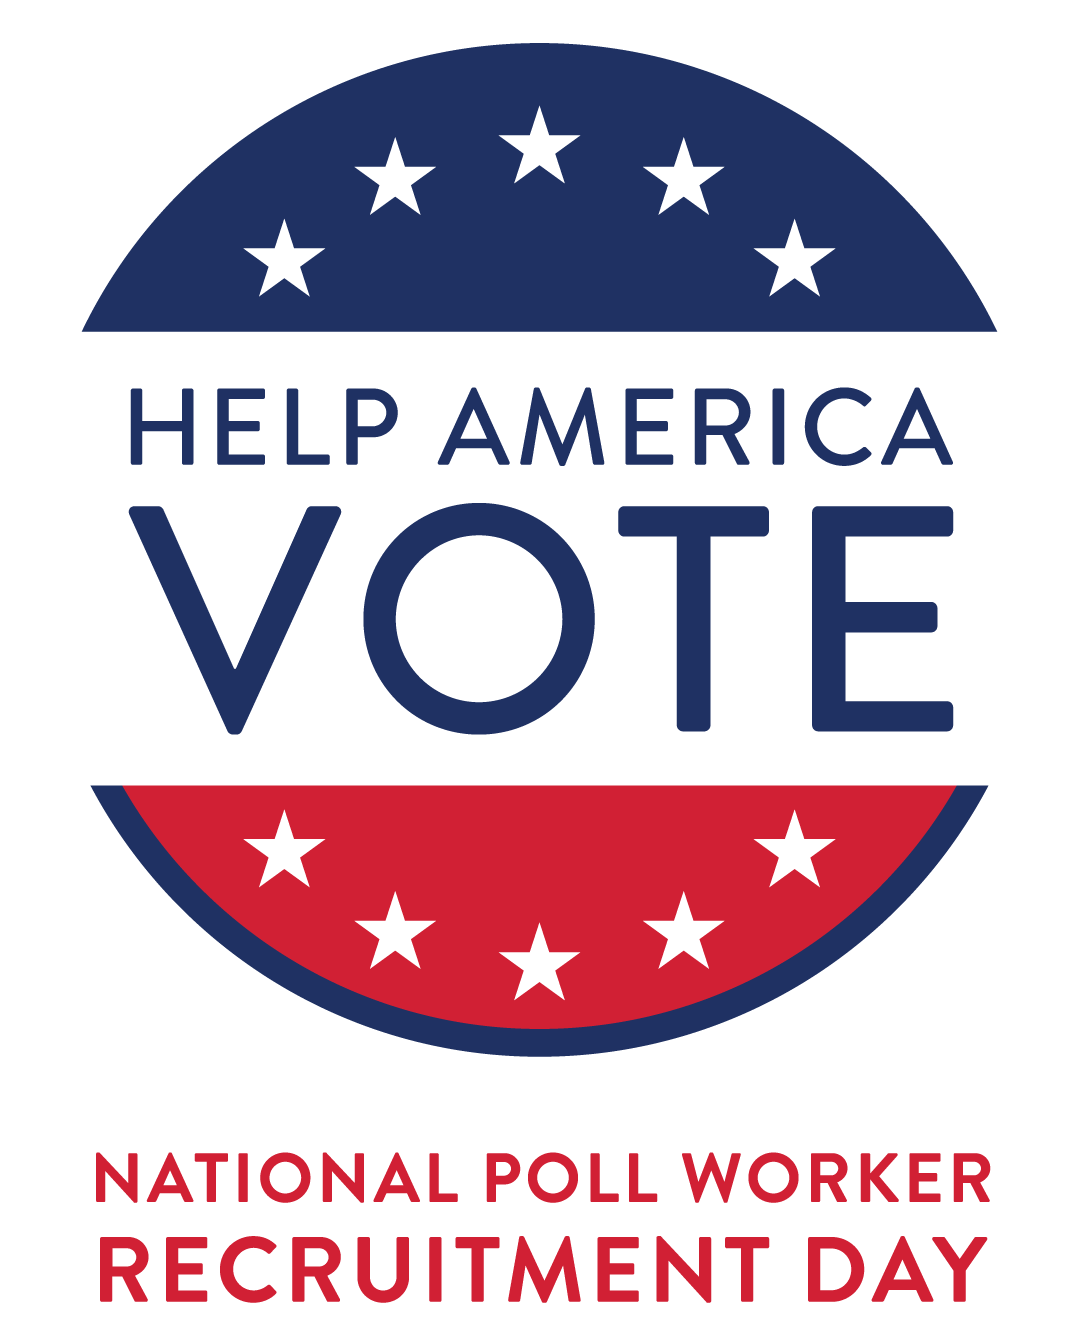 Help America Vote, National Poll Worker Recruitment Day